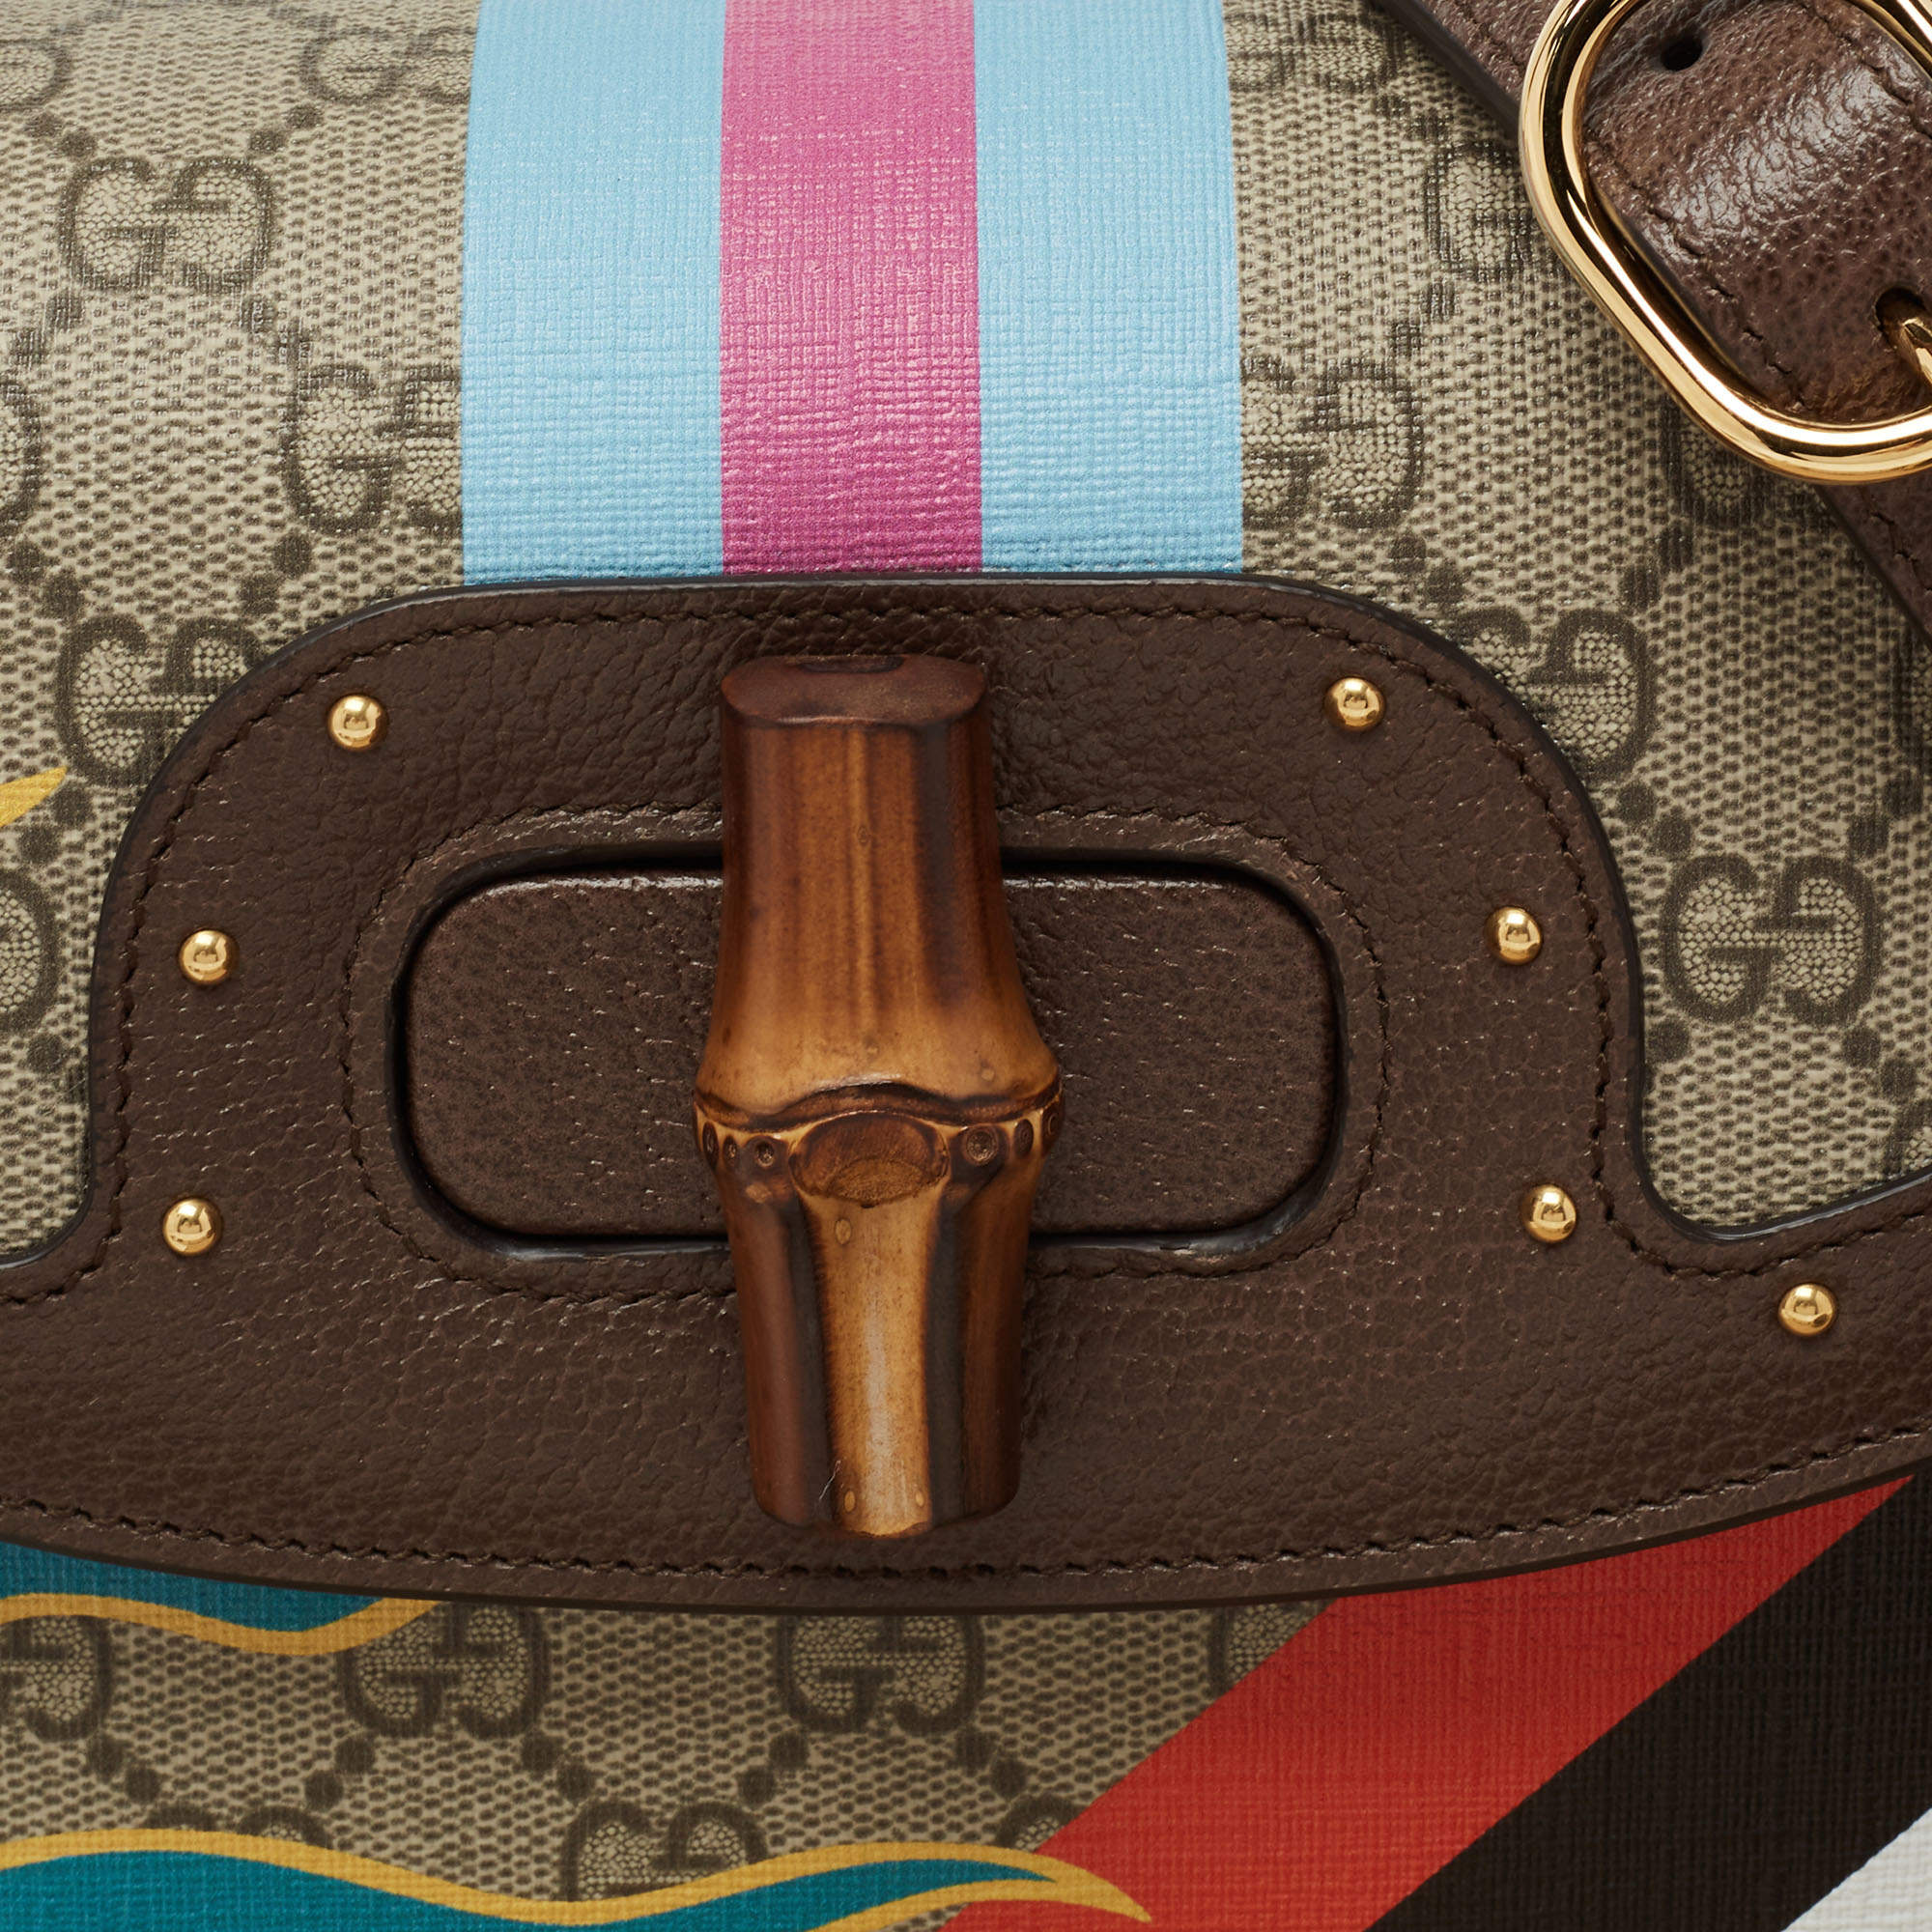 Gucci Bamboo 1947 Top Handle Bag Limited Edition Geometric Print Leather  Medium Multicolor 2258245